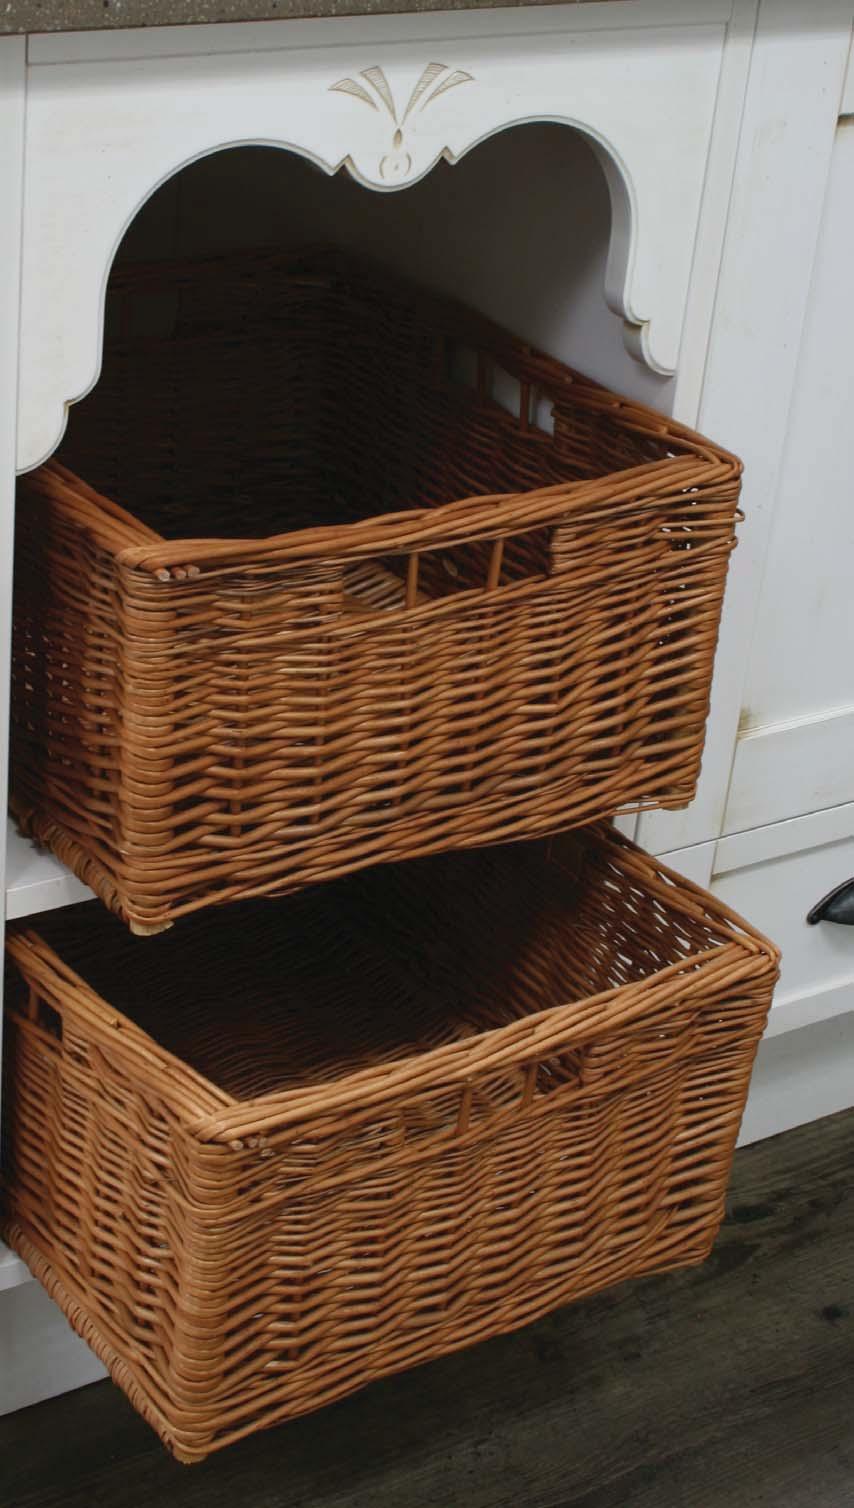 WICKER BASKET With four handle holes.